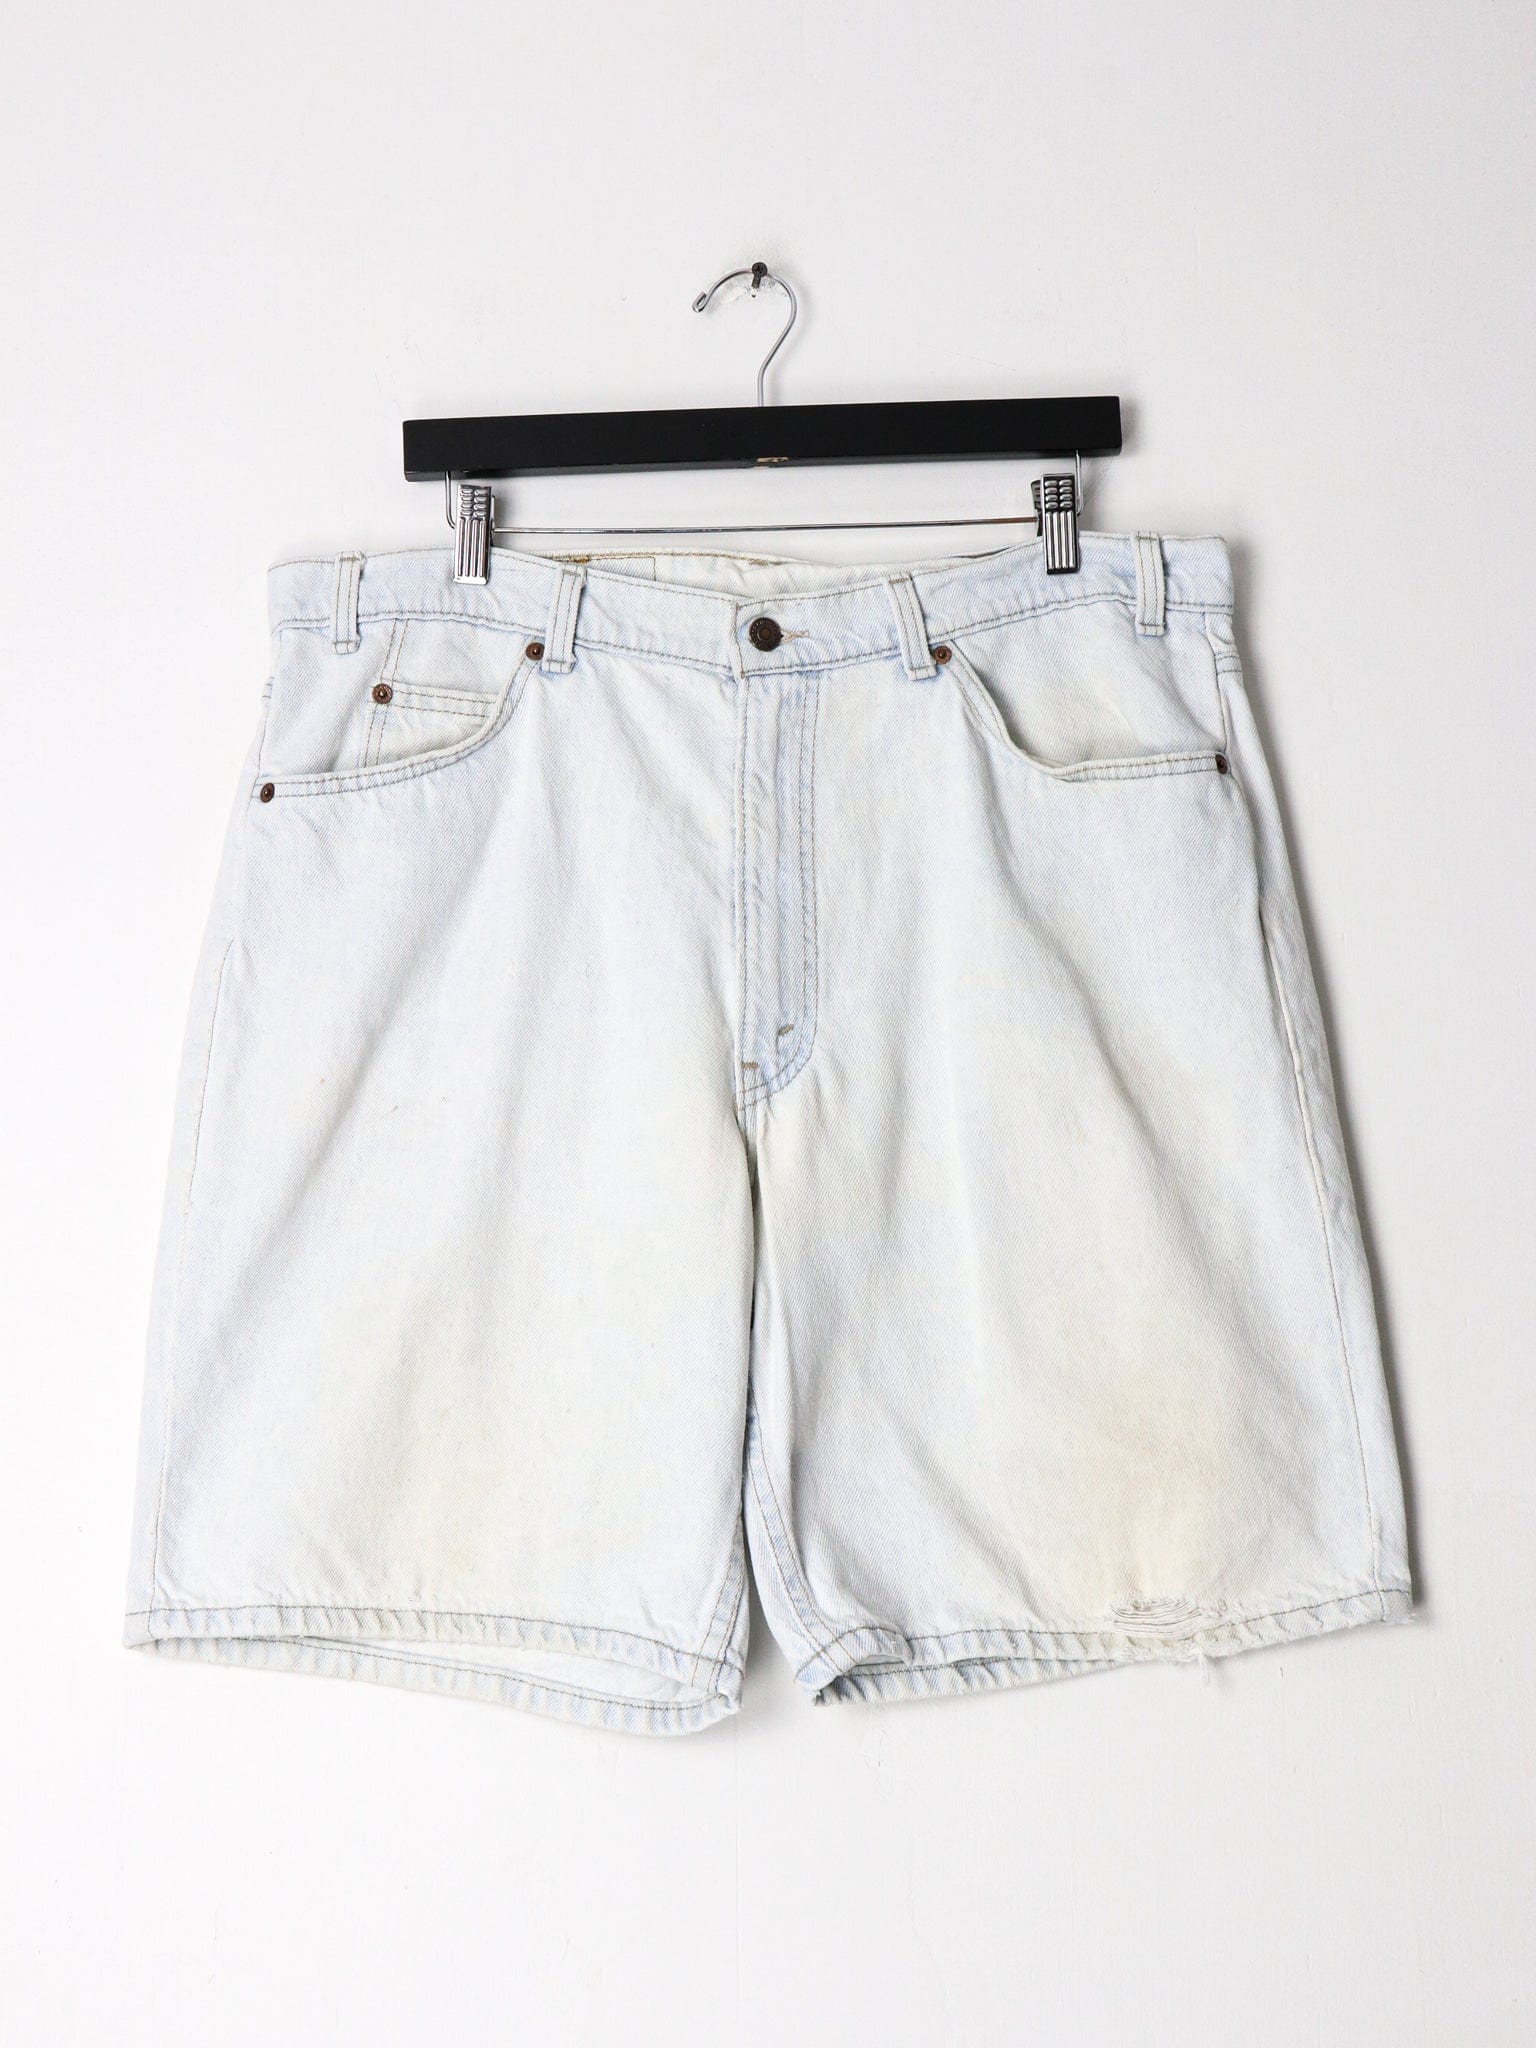 Vintage Levi's 550 Relaxed Fit Denim Shorts Size 38